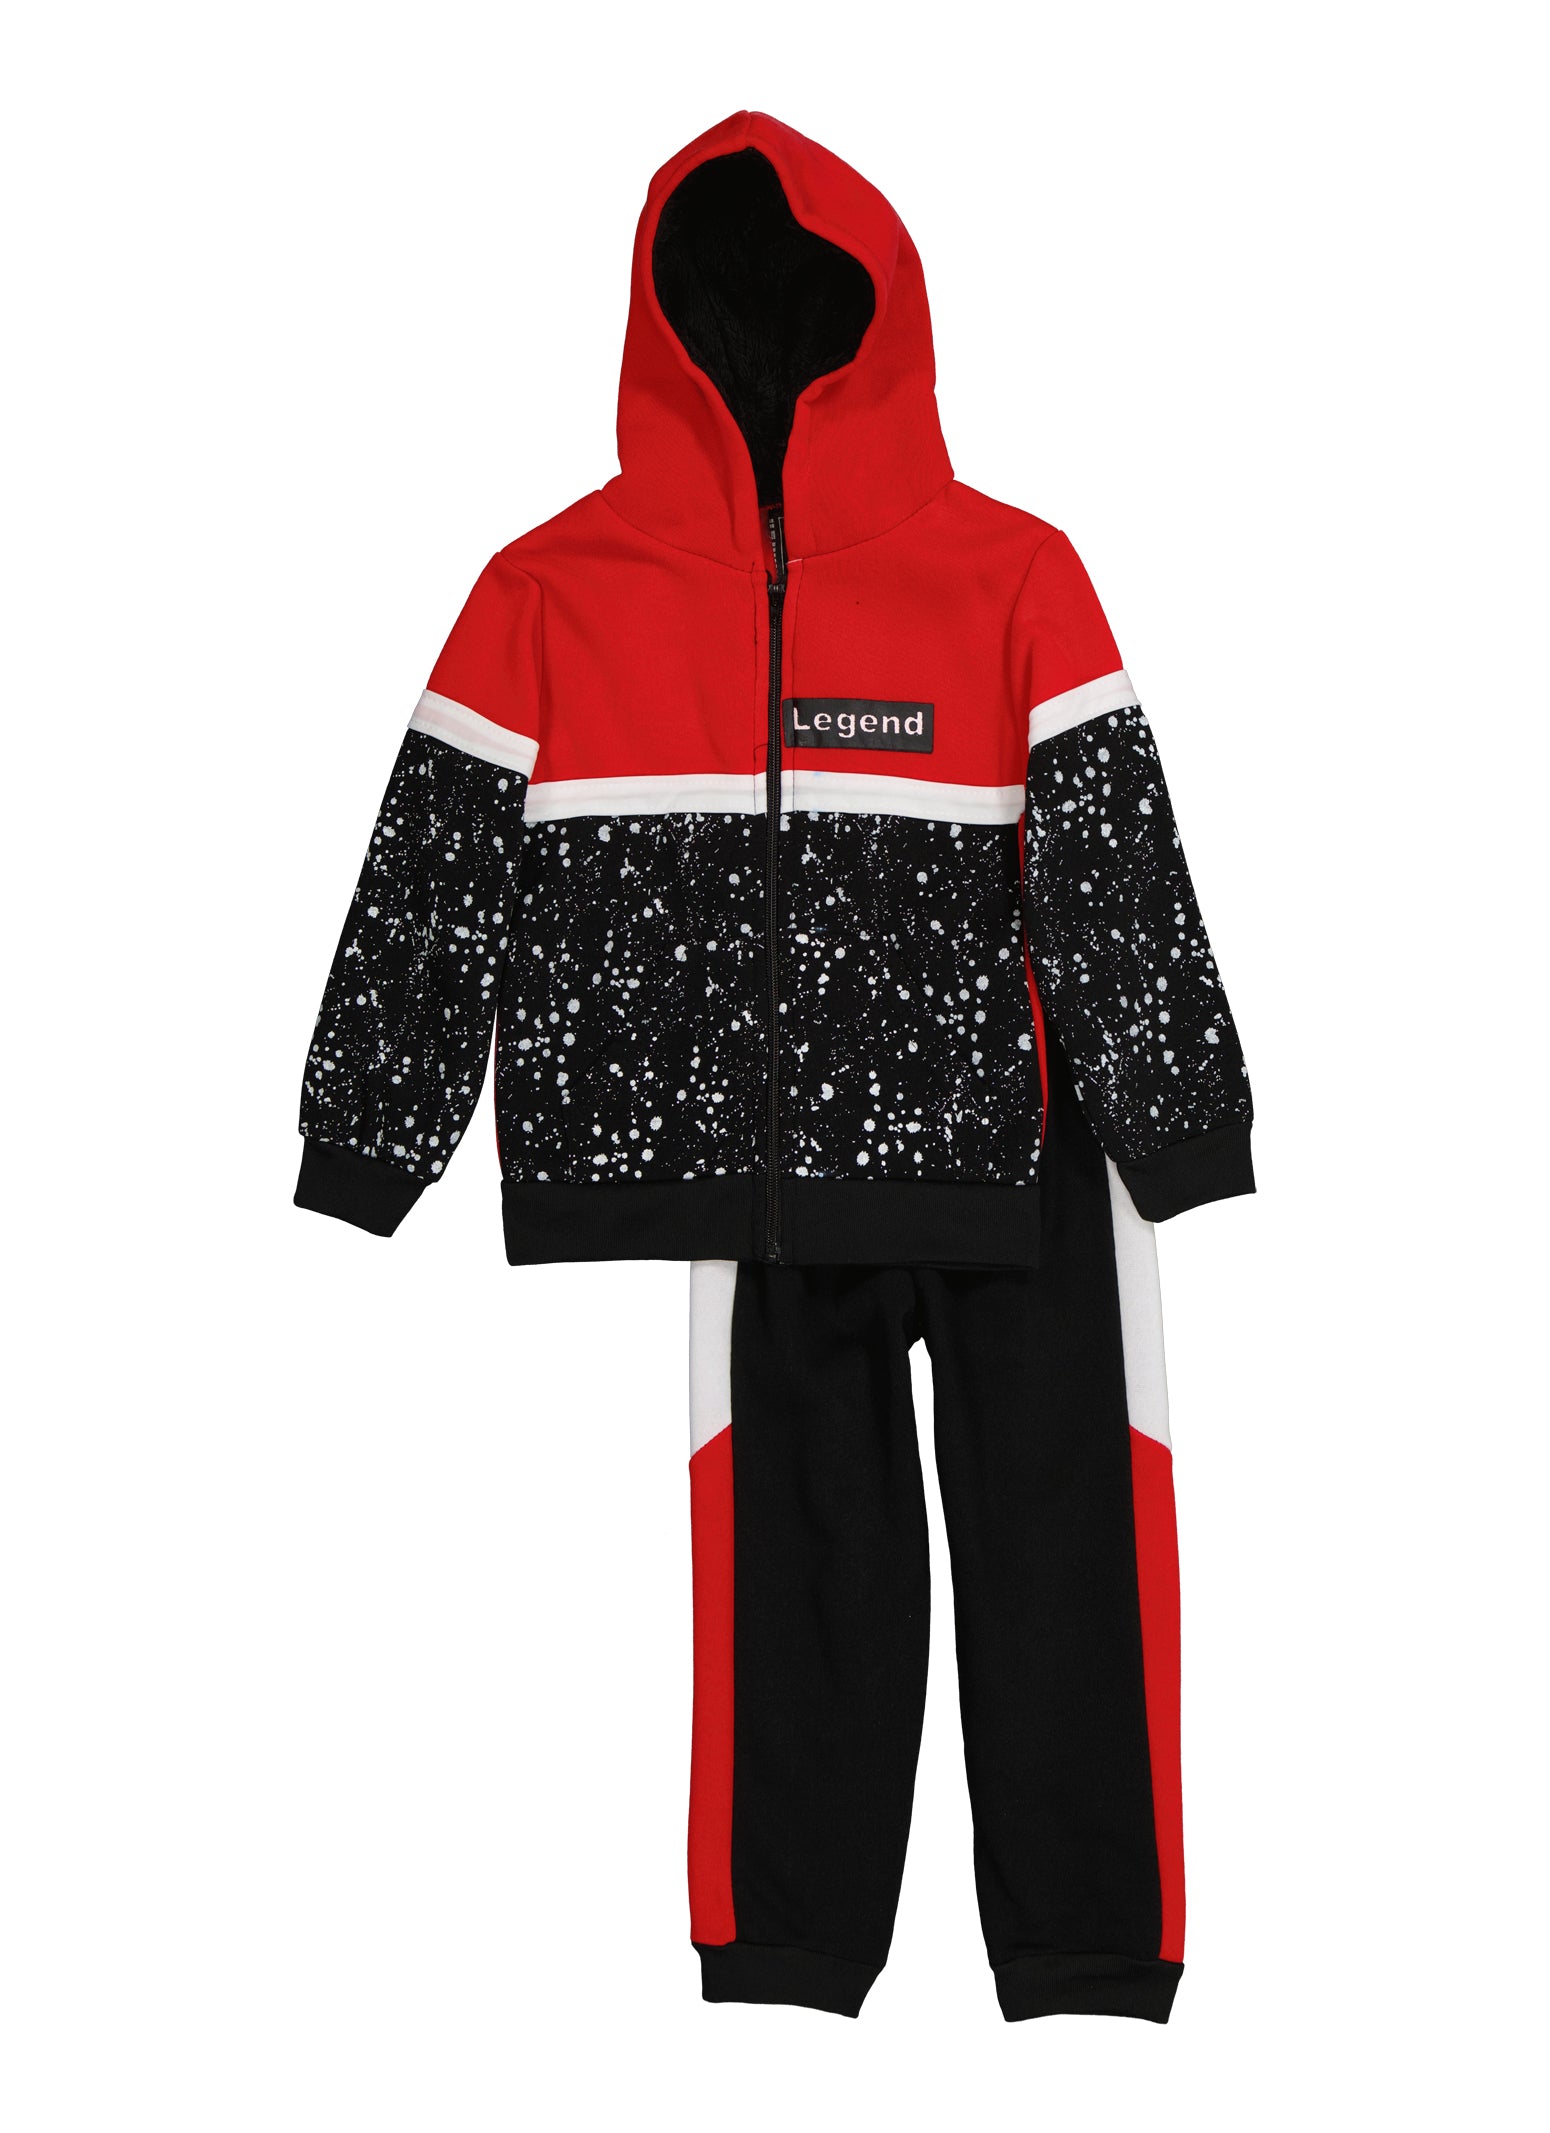 Little Boys Legend Zip Up Hoodie and Joggers, Red, Size 4